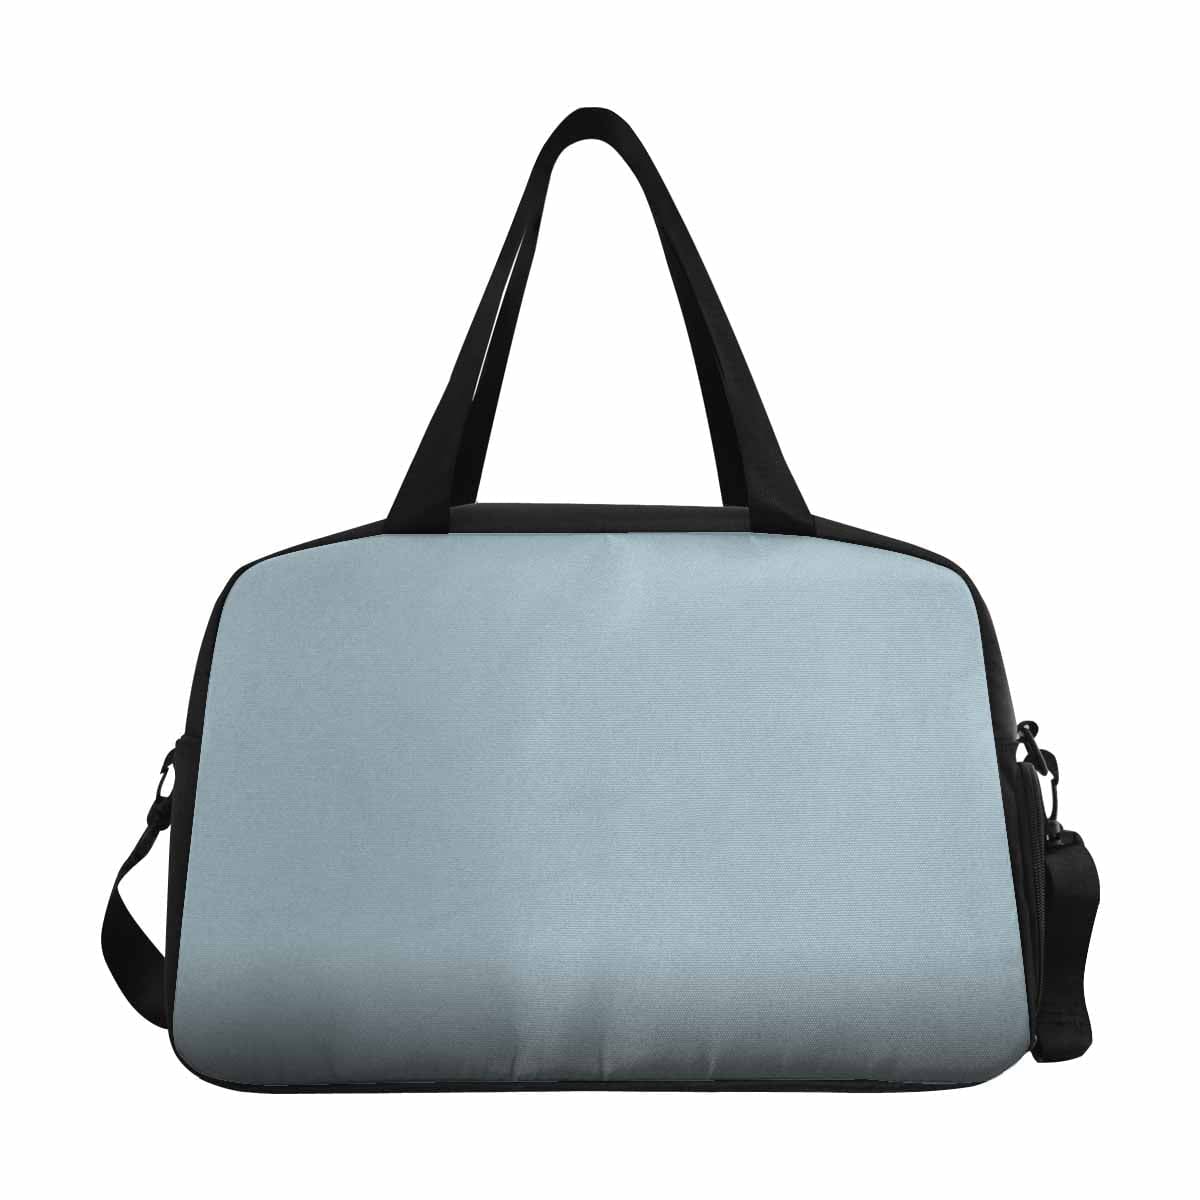 Pastel Blue Tote And Crossbody Travel Bag - Bags | Travel Bags | Crossbody